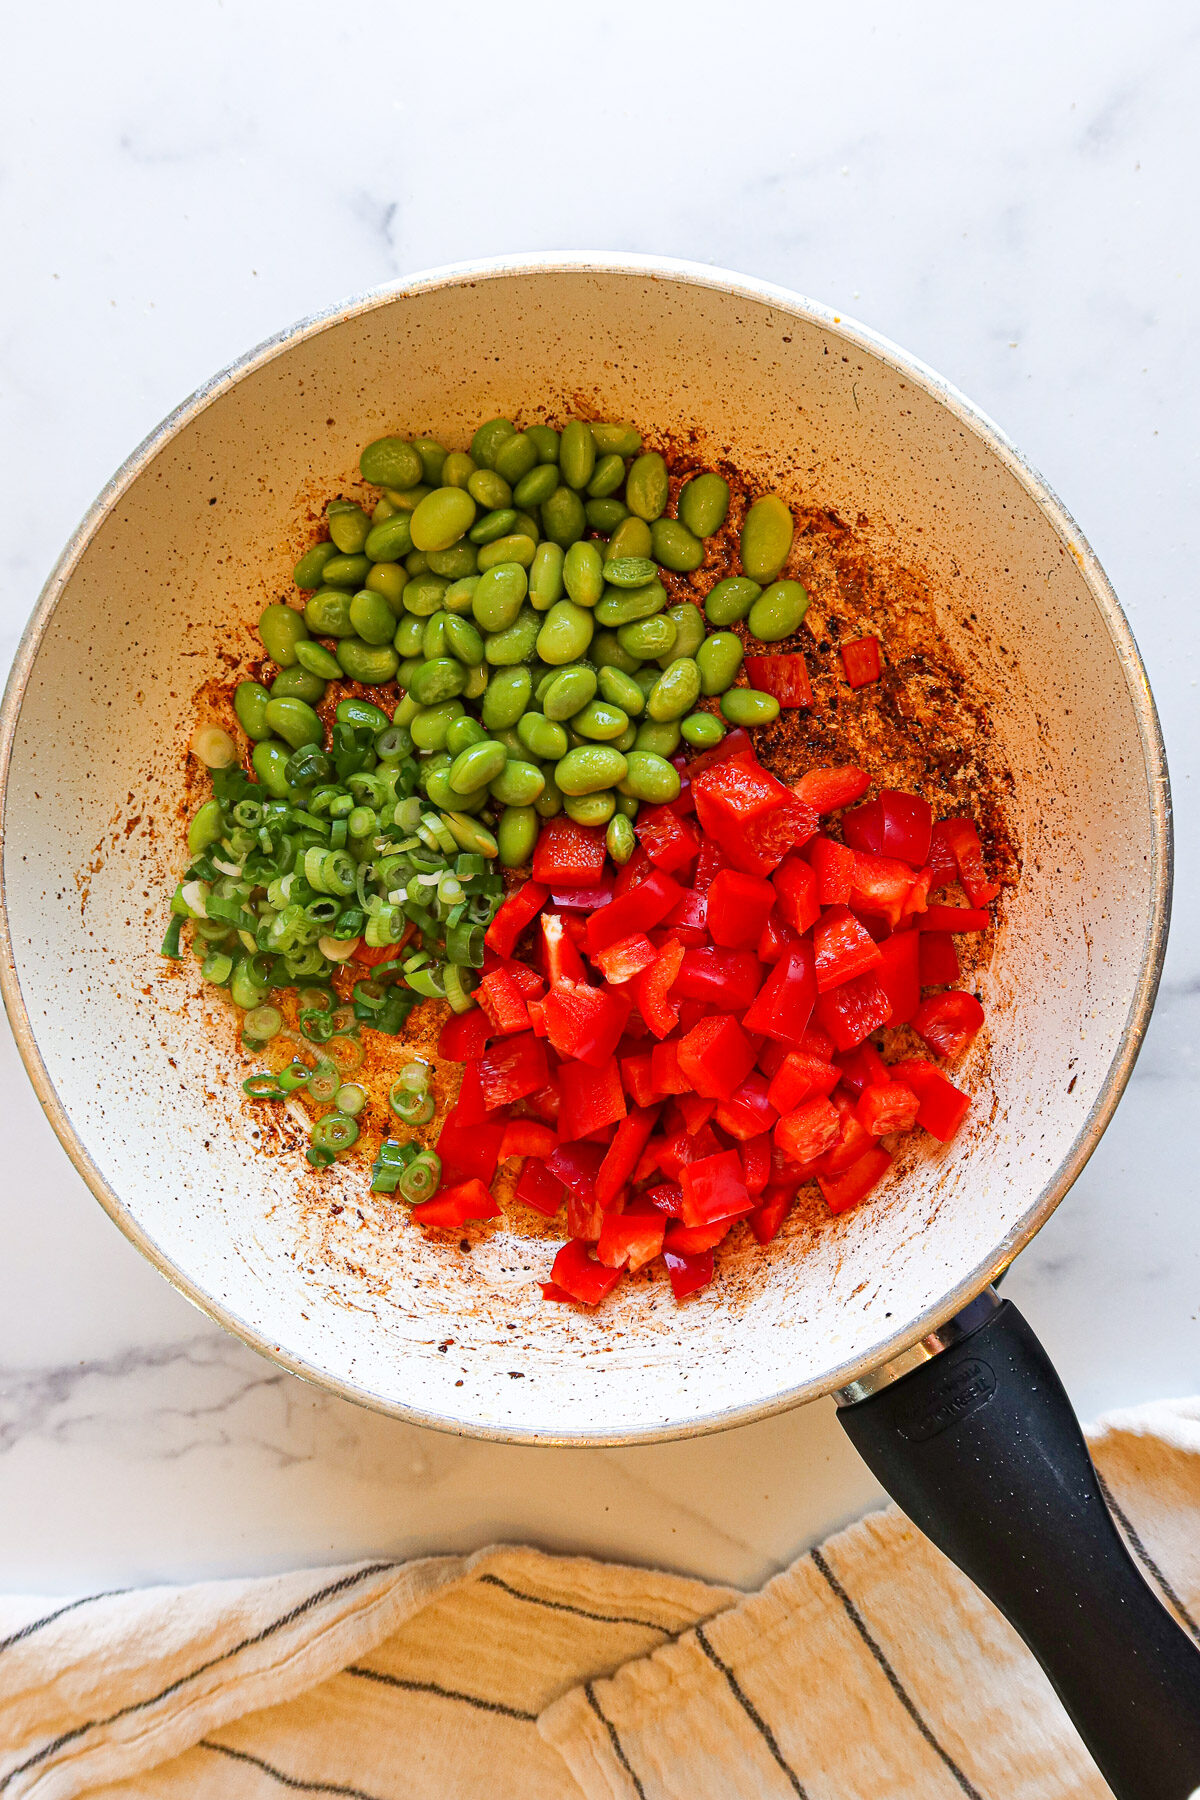 Sautéing green onion, edamame and red bell pepper.